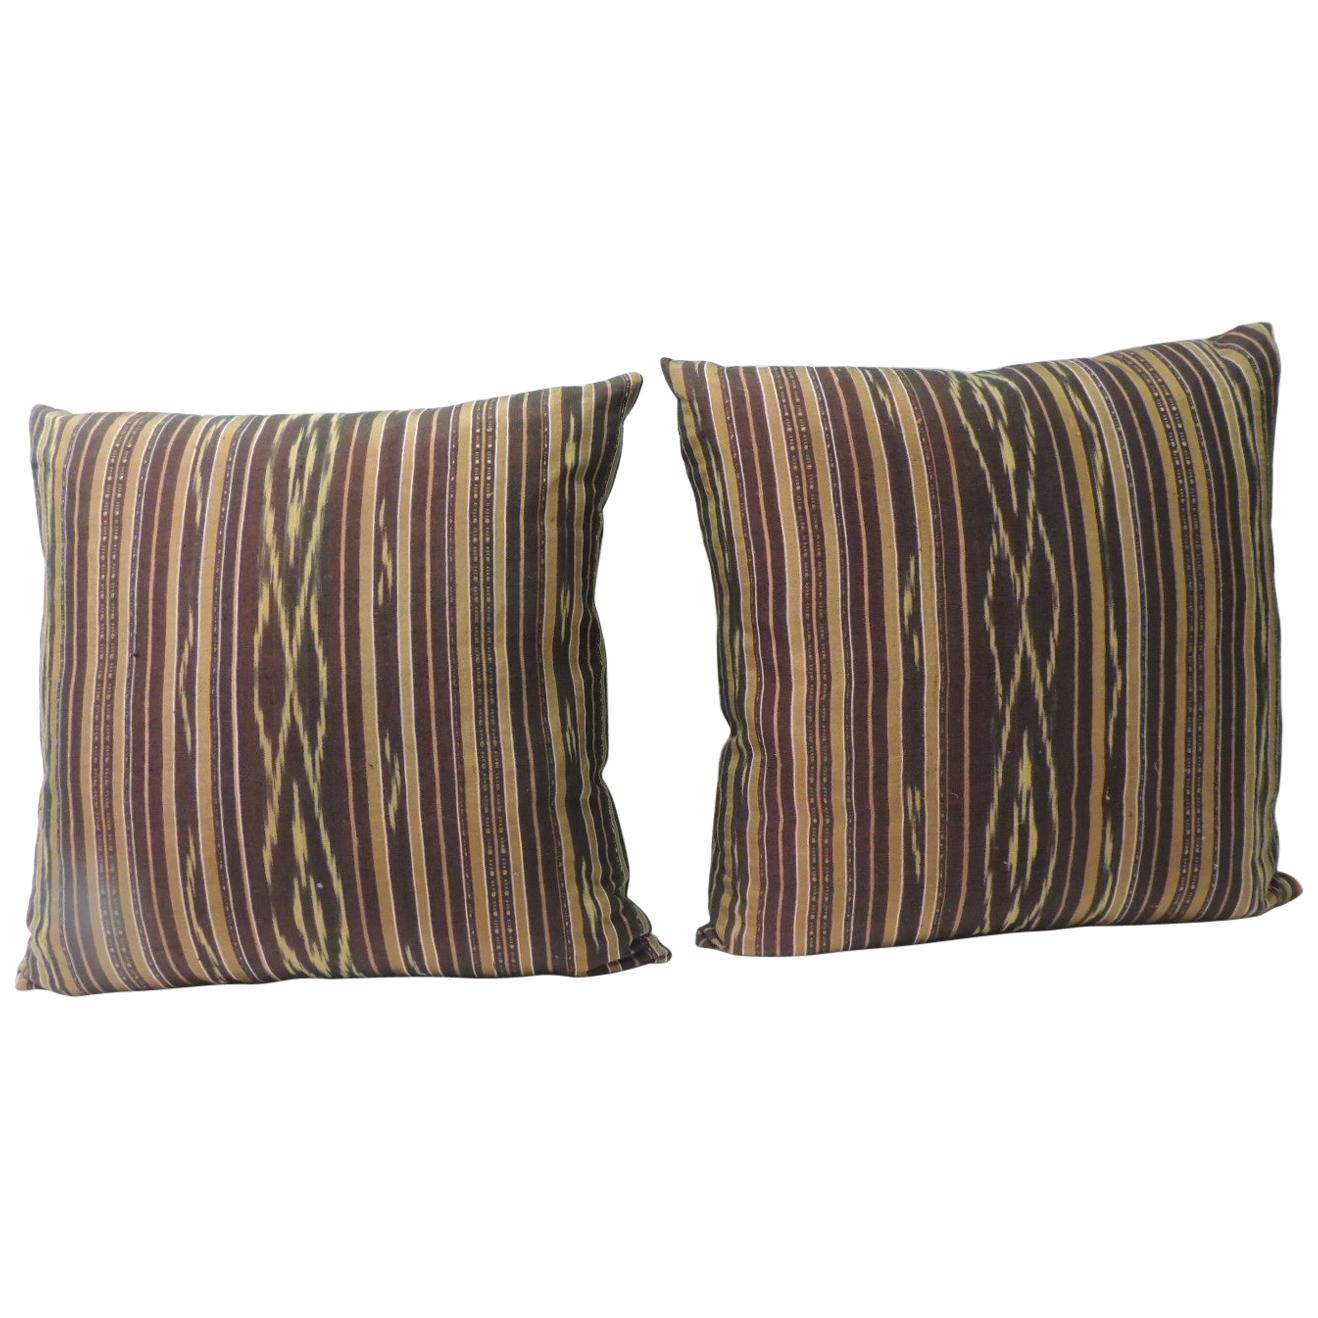 Pair of Vintage Woven Purple and Yellow Silk Ikat Decorative Square Pillows